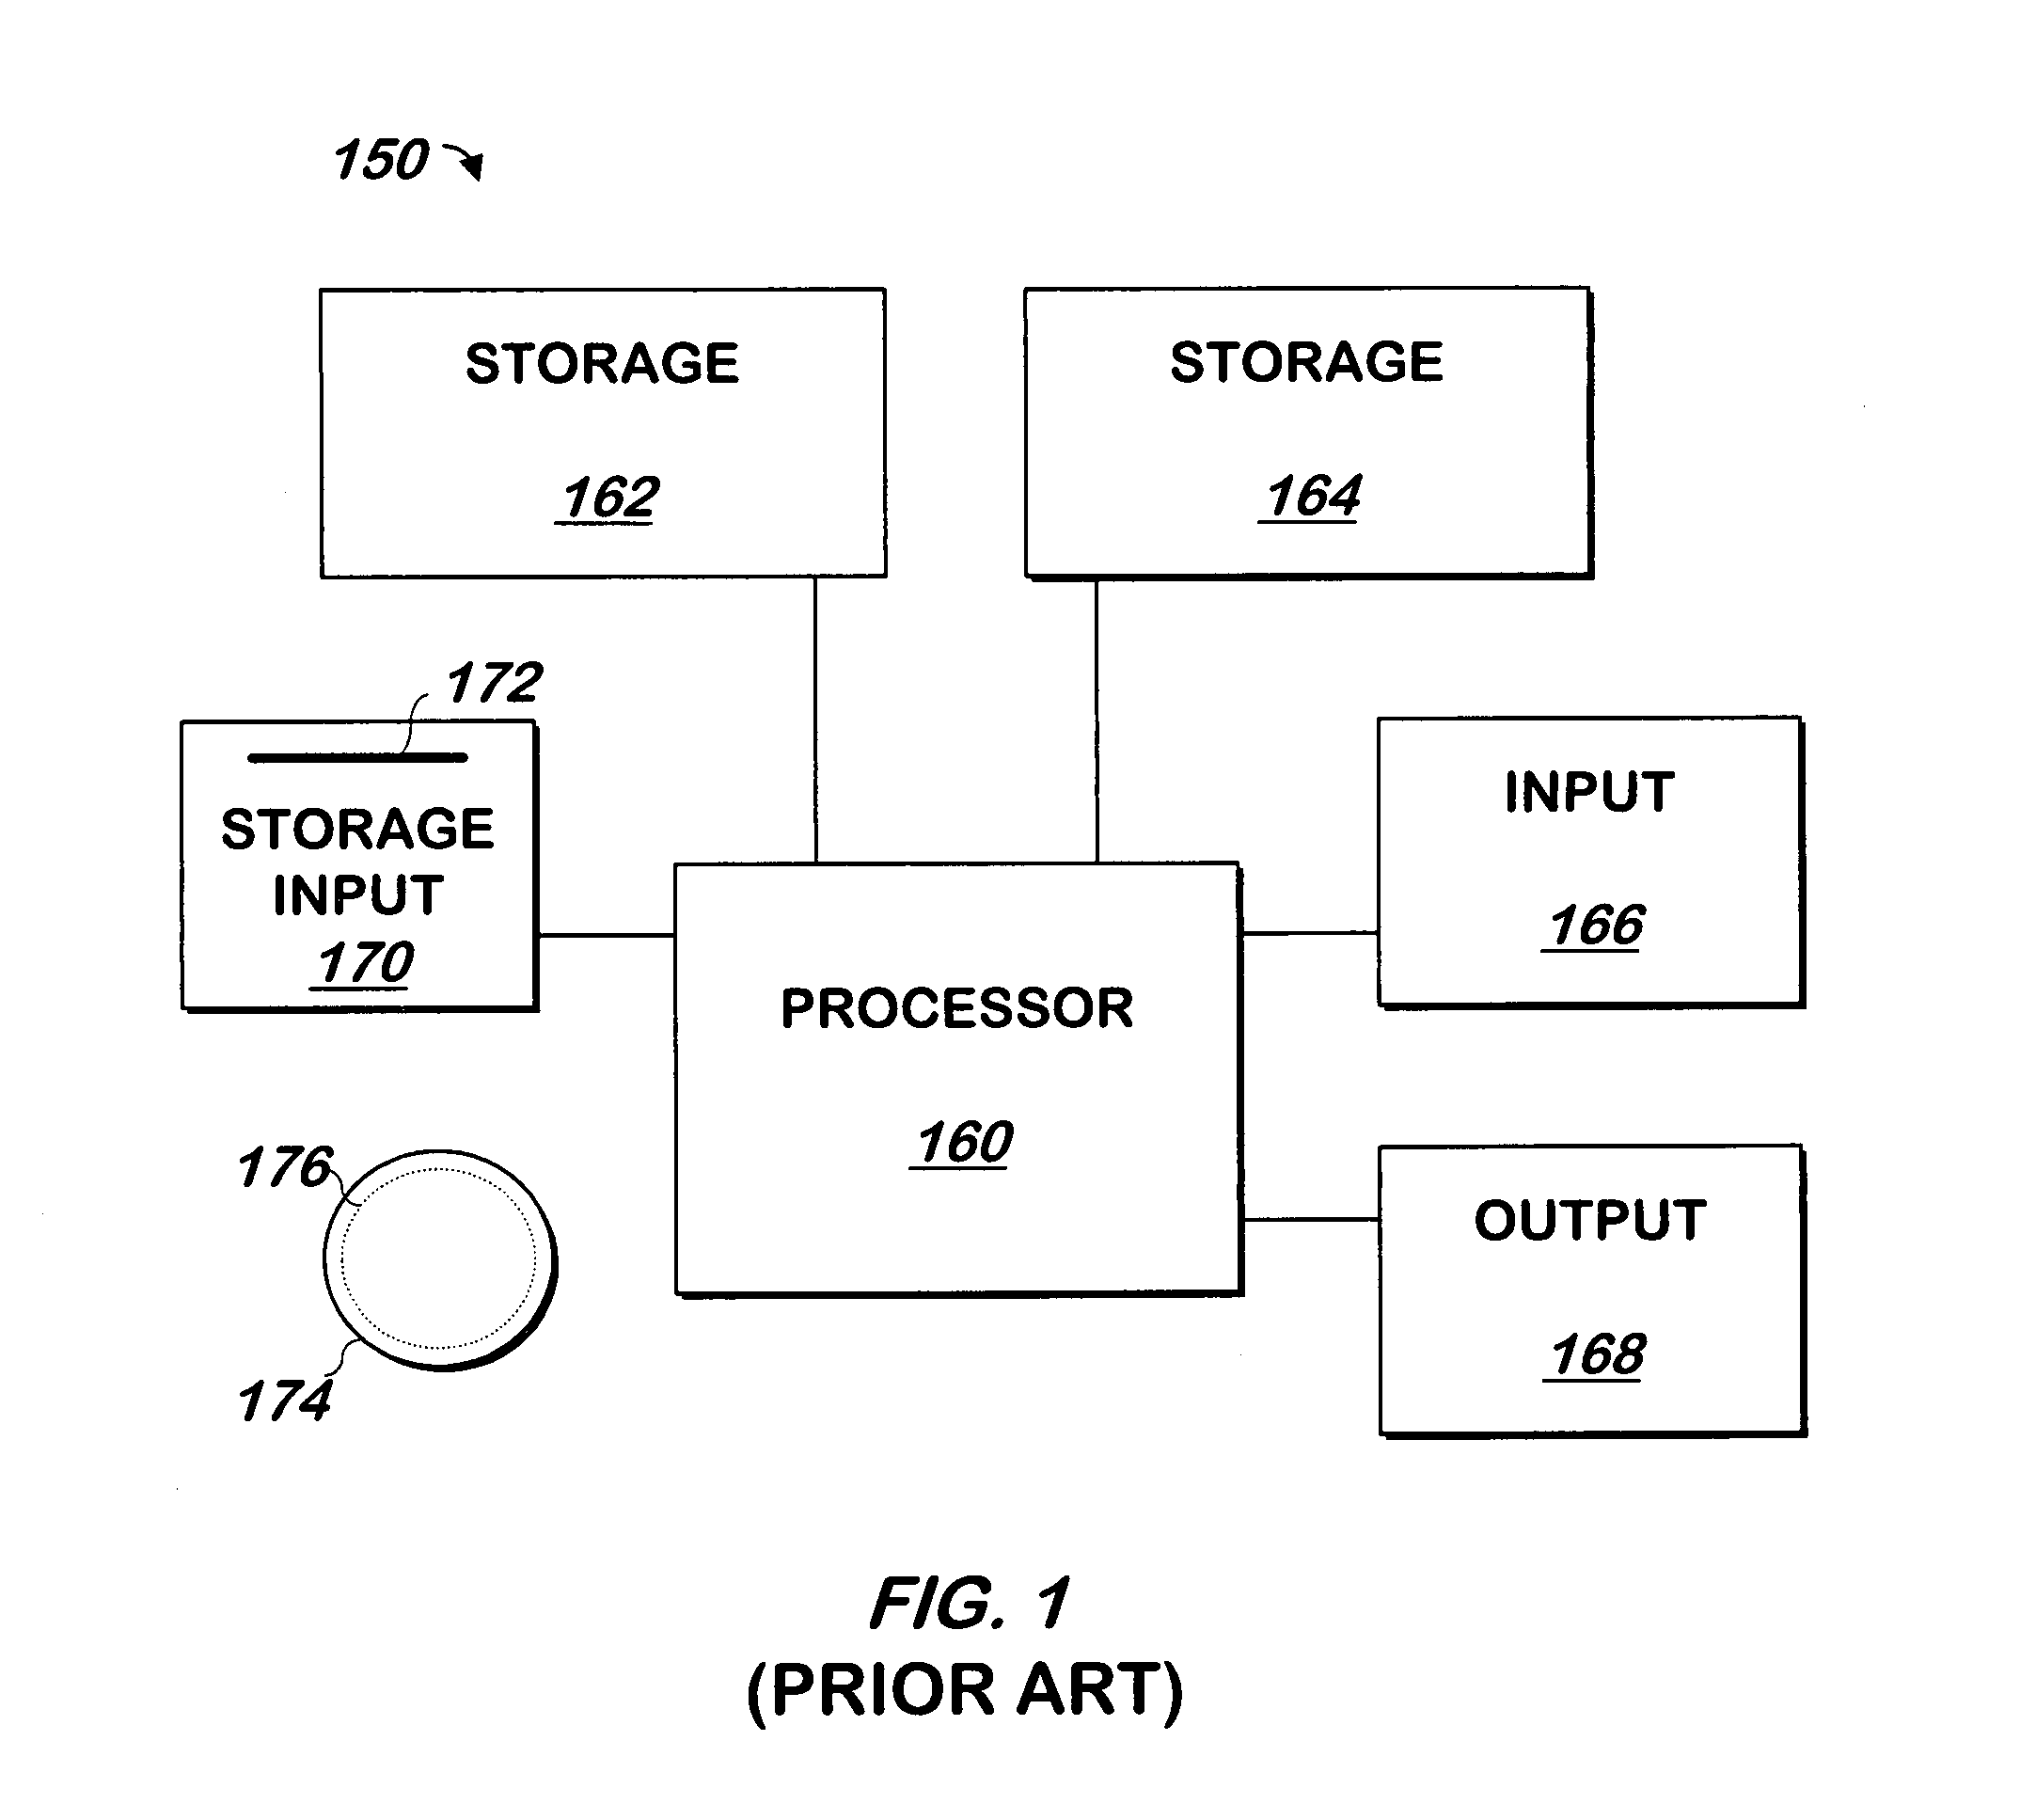 System and method for identifying cost metrics for a network